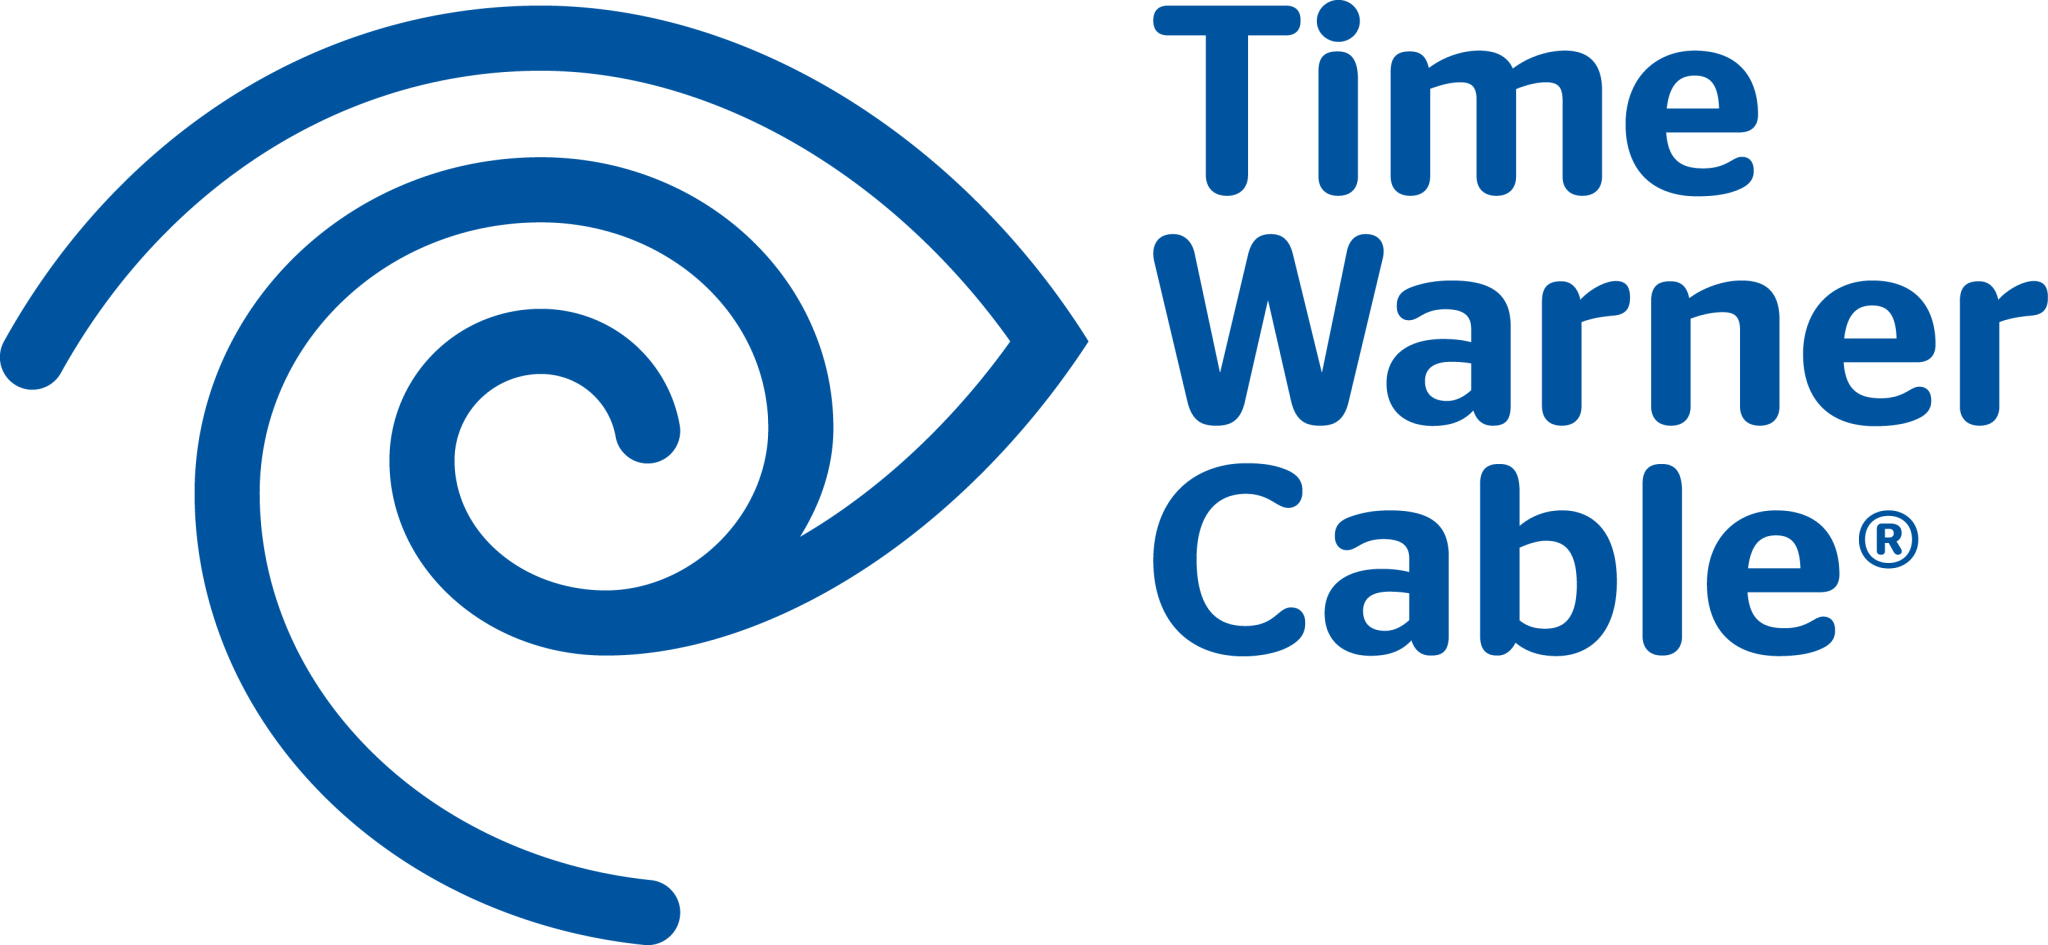 charter time warner cable